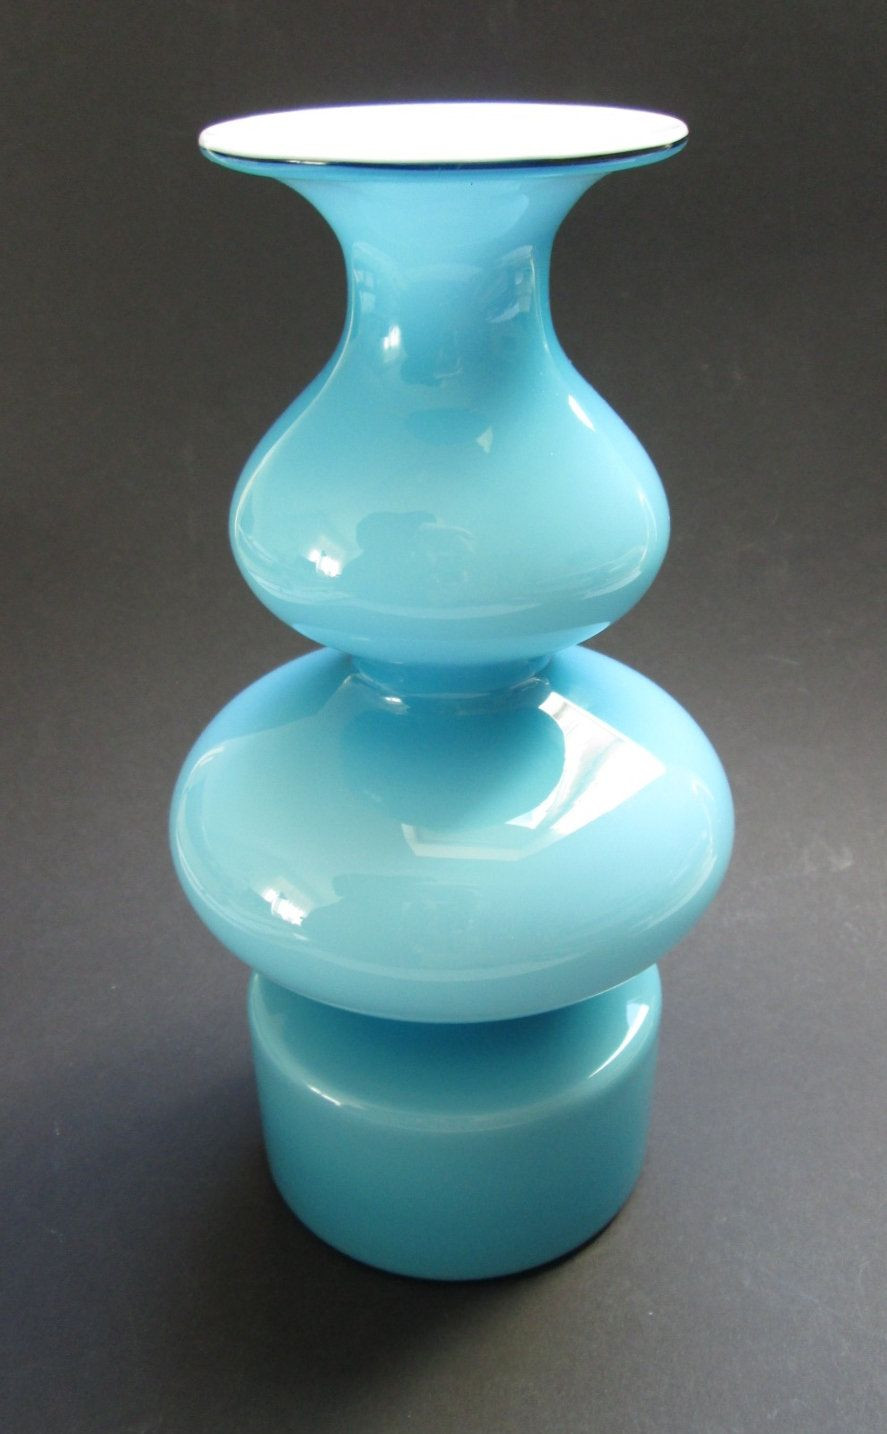 10 Recommended Blue Vases for Centerpieces 2024 free download blue vases for centerpieces of blue and opal white carnaby danish vase designed 1968 by per in blue and opal white carnaby danish vase designed 1968 by per lac2bctken for holmegaard glasvac2